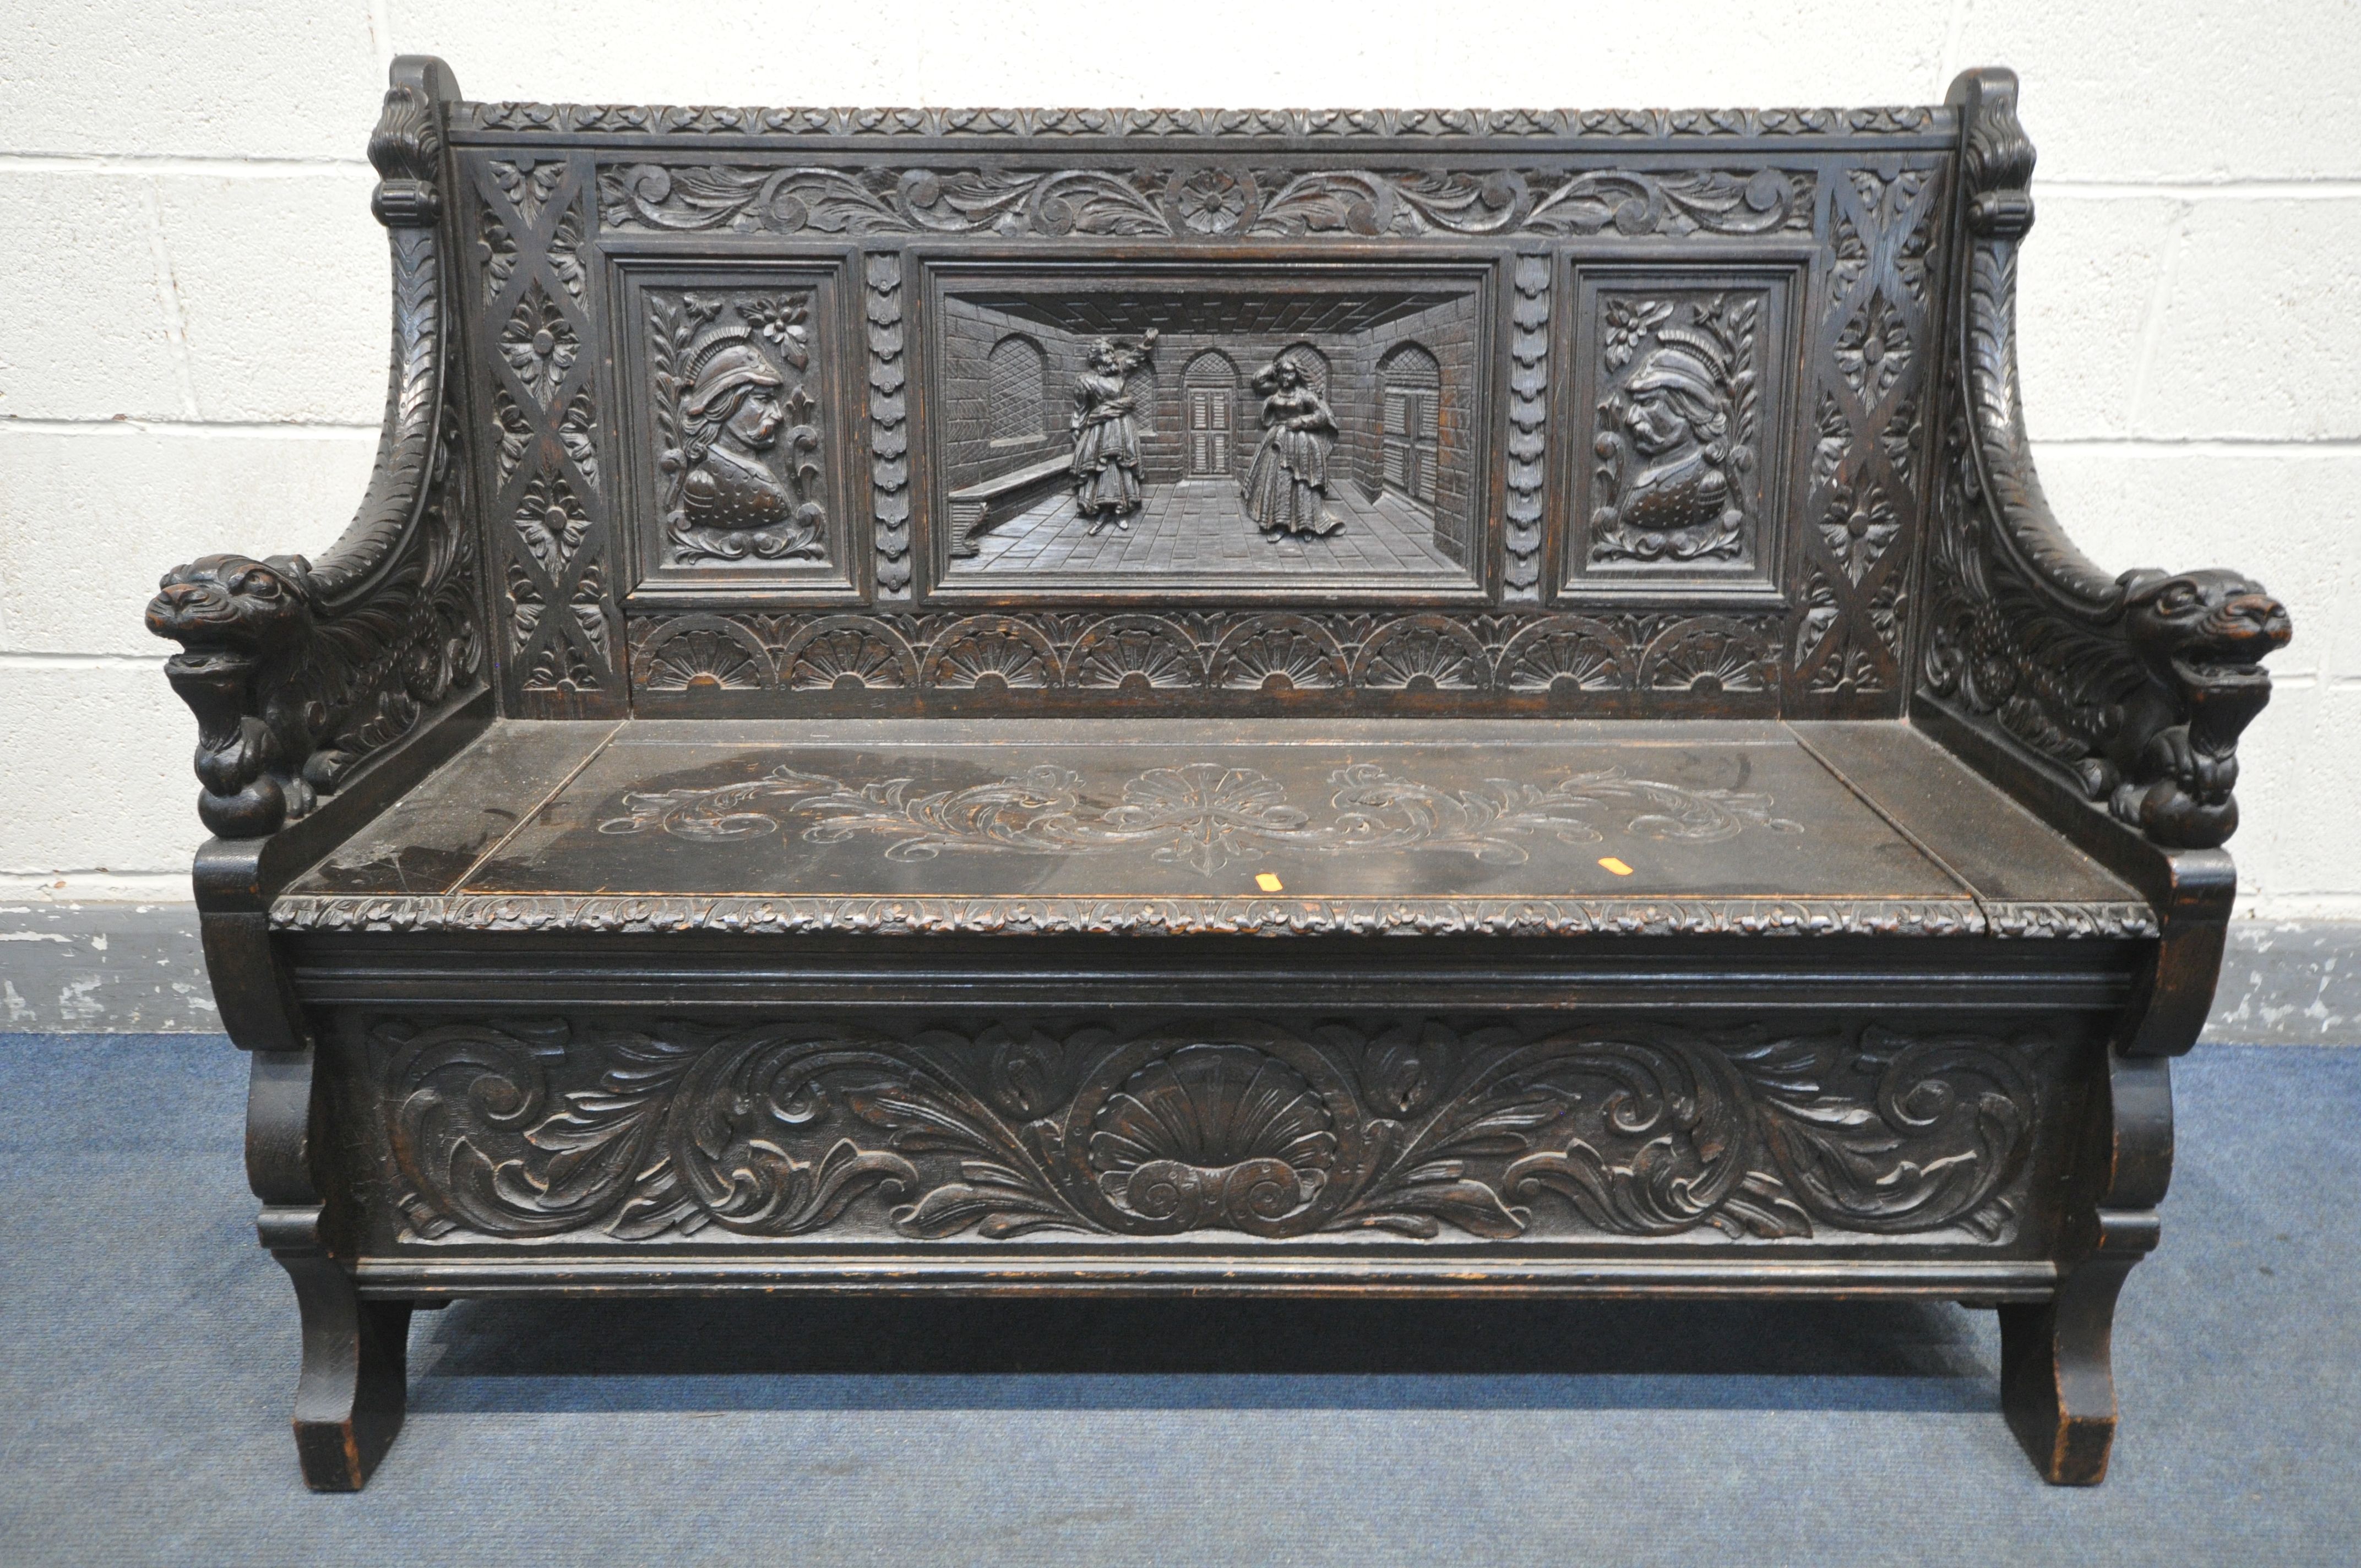 A LATE 19TH CENTURY CARVED OAK JACOBETHAN STYLE HALL SETTLE/BENCH, the two outer panels depicting